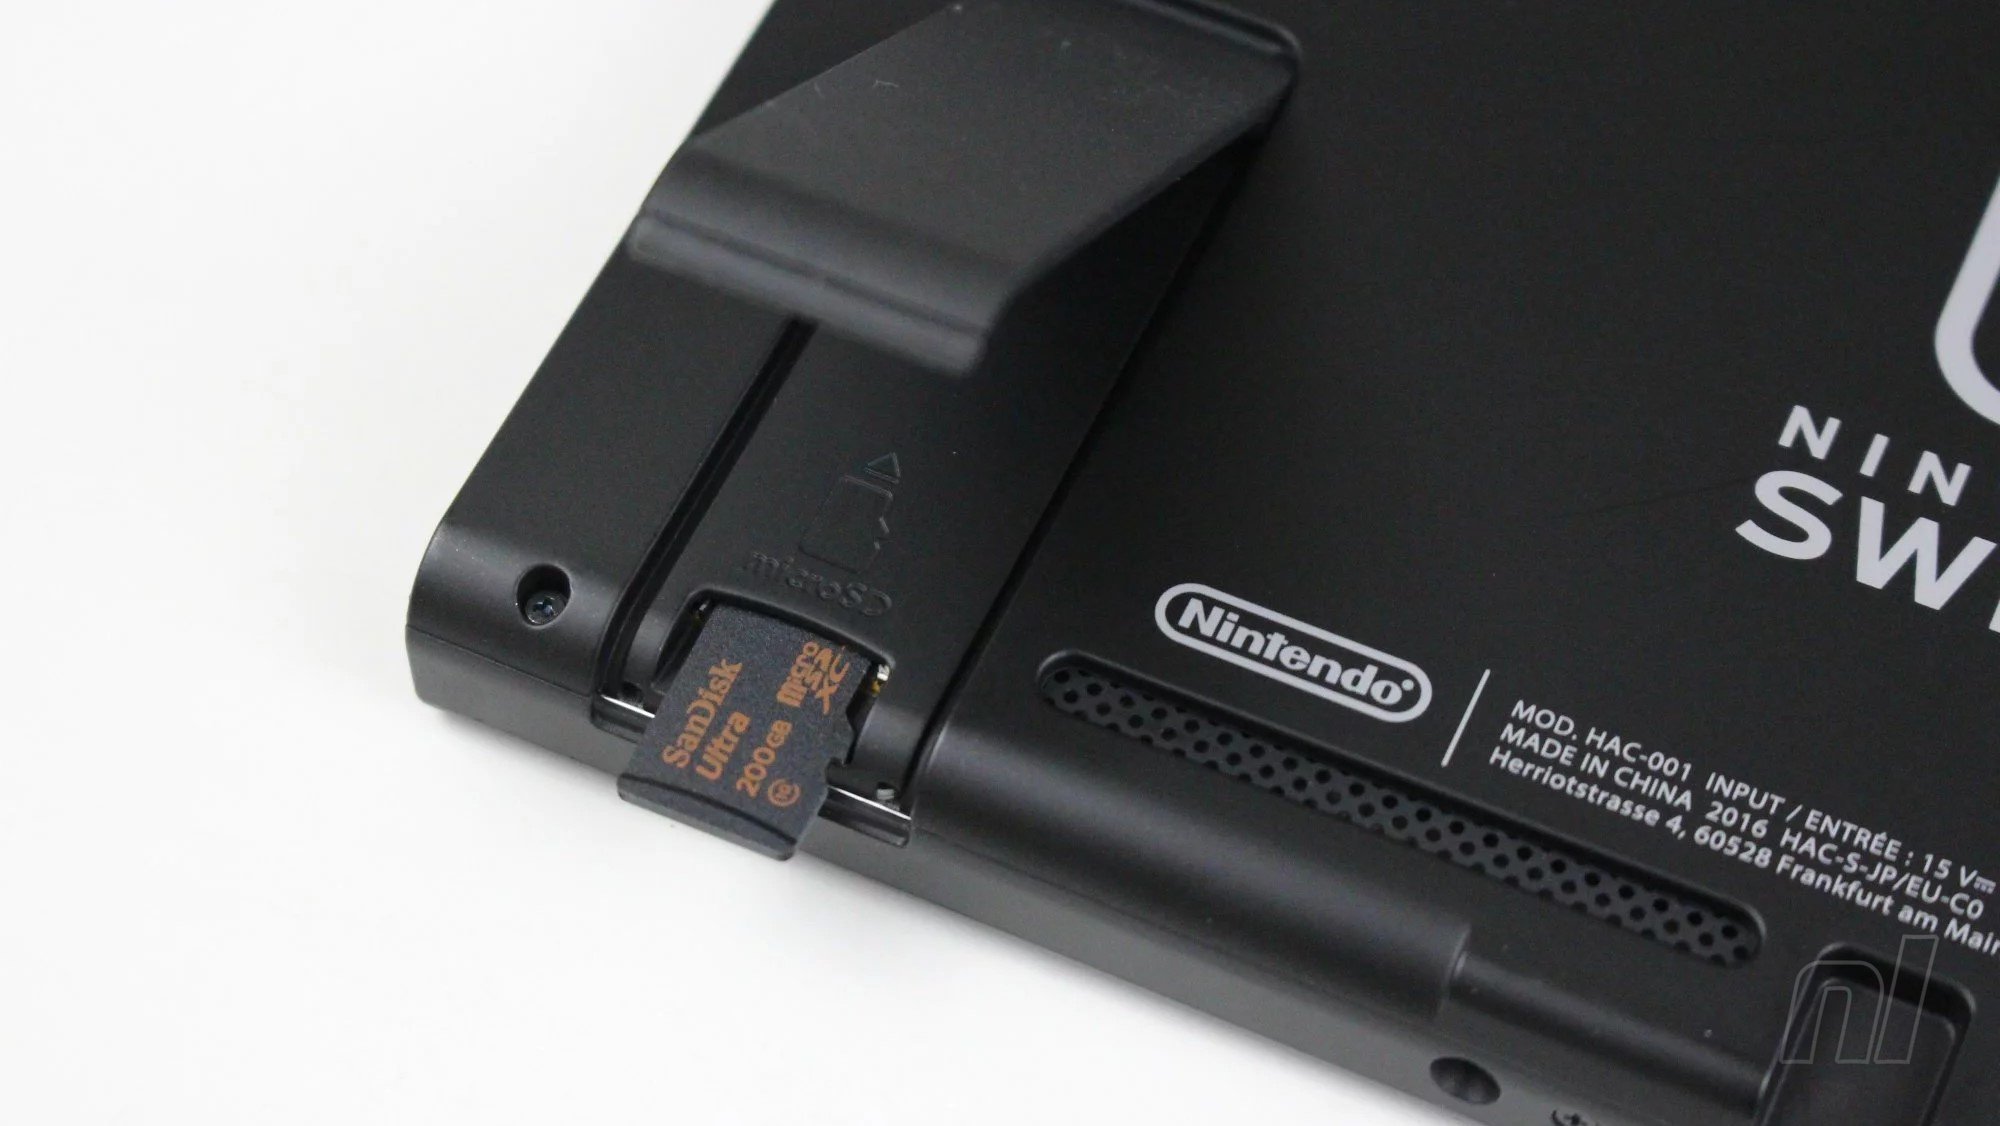 what memory card do i need for nintendo switch